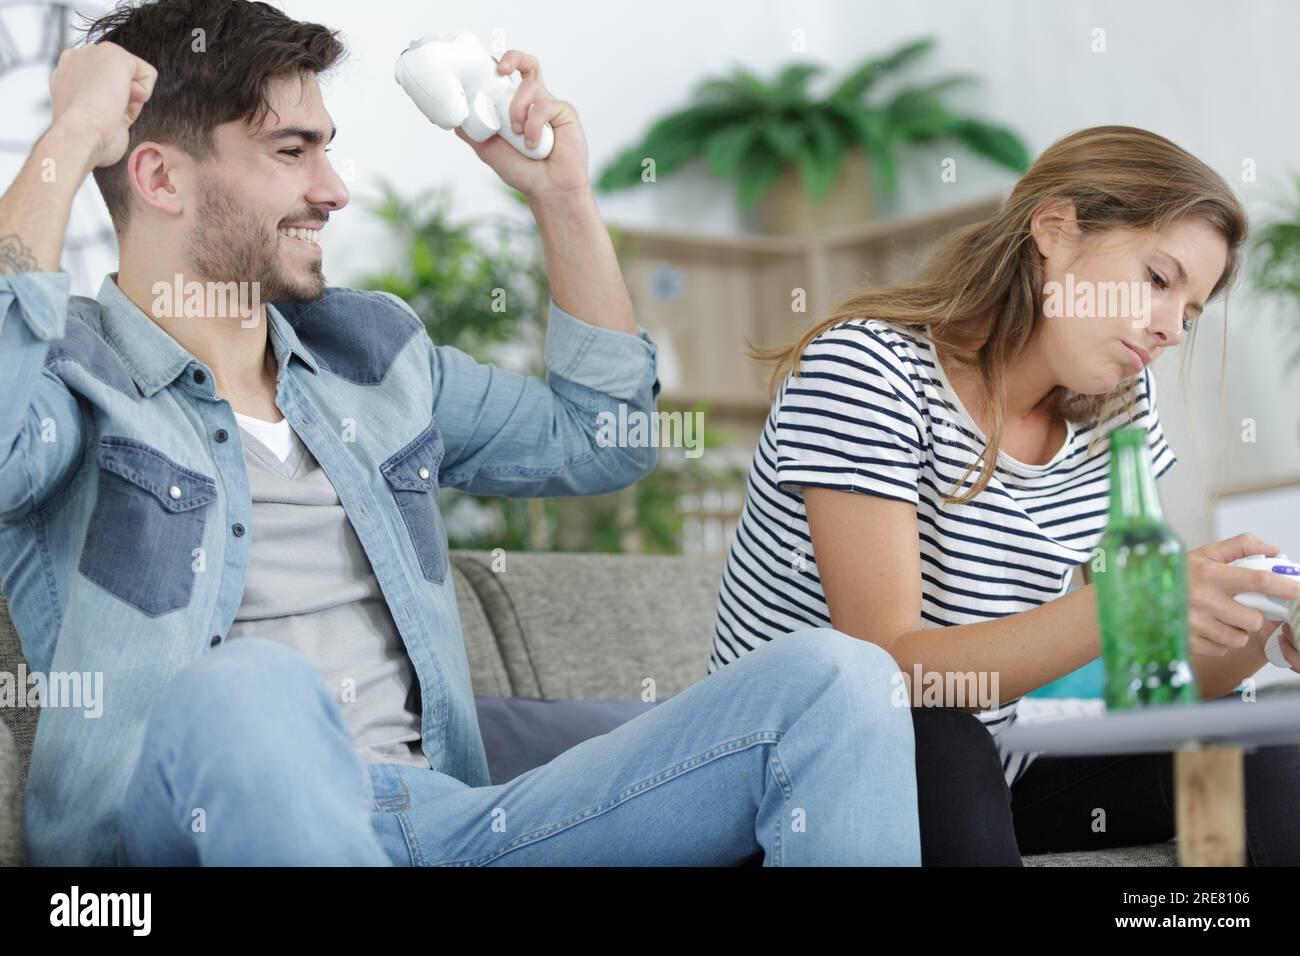 lady sulking because her boyfriend won the video game Stock Photo